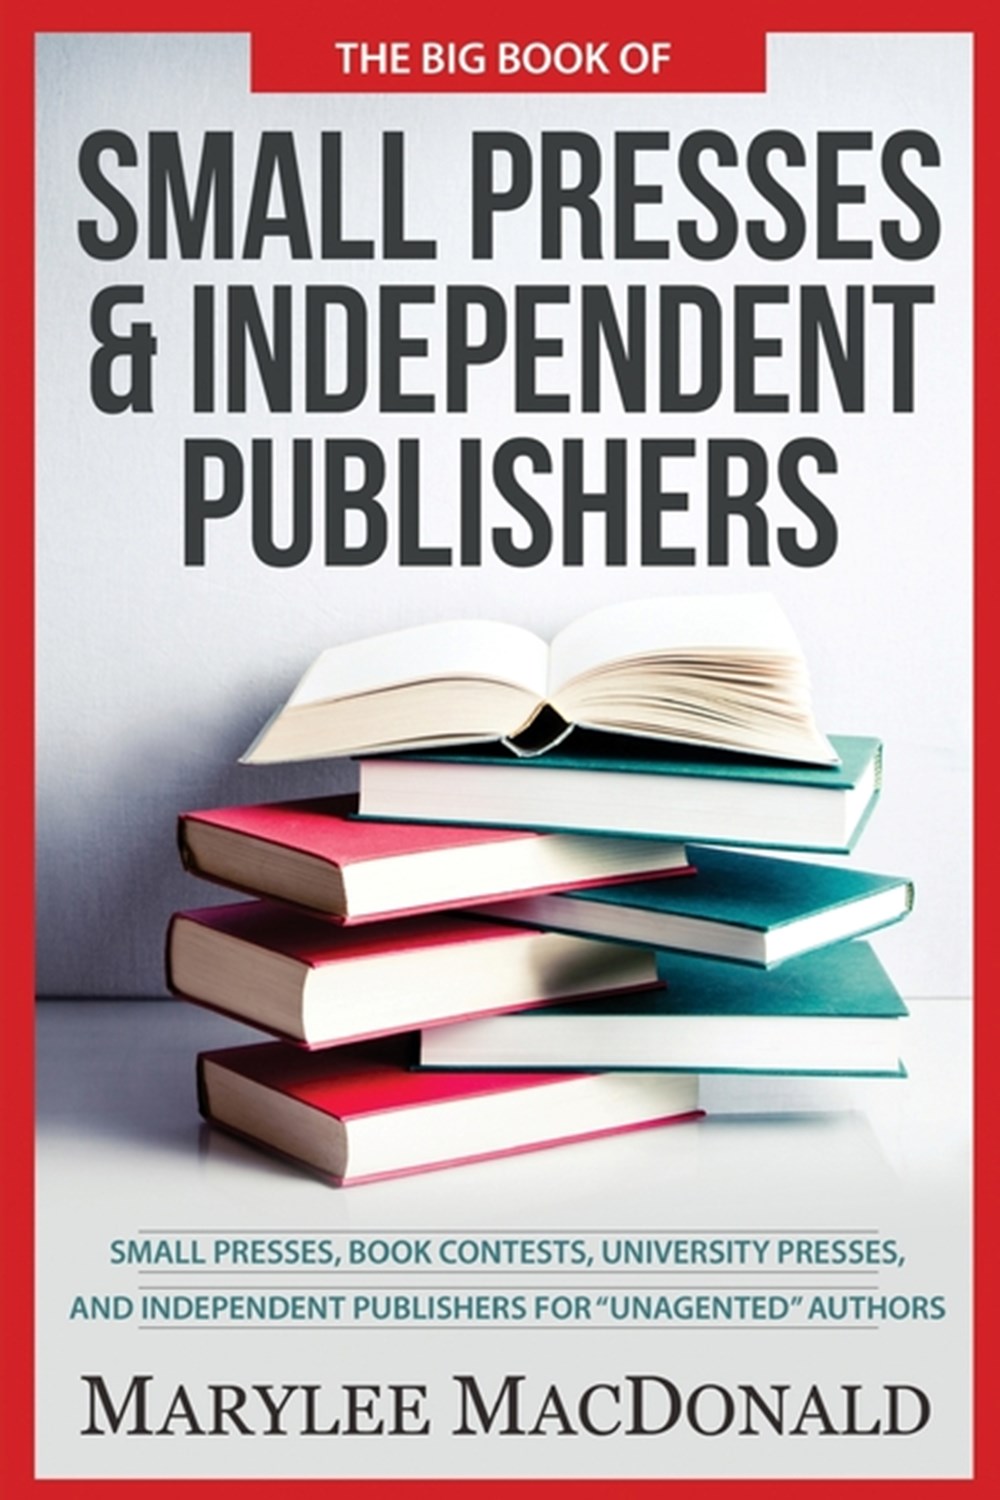 Big Book of Small Presses and Independent Publishers: Small Presses, Book Contests, University Press